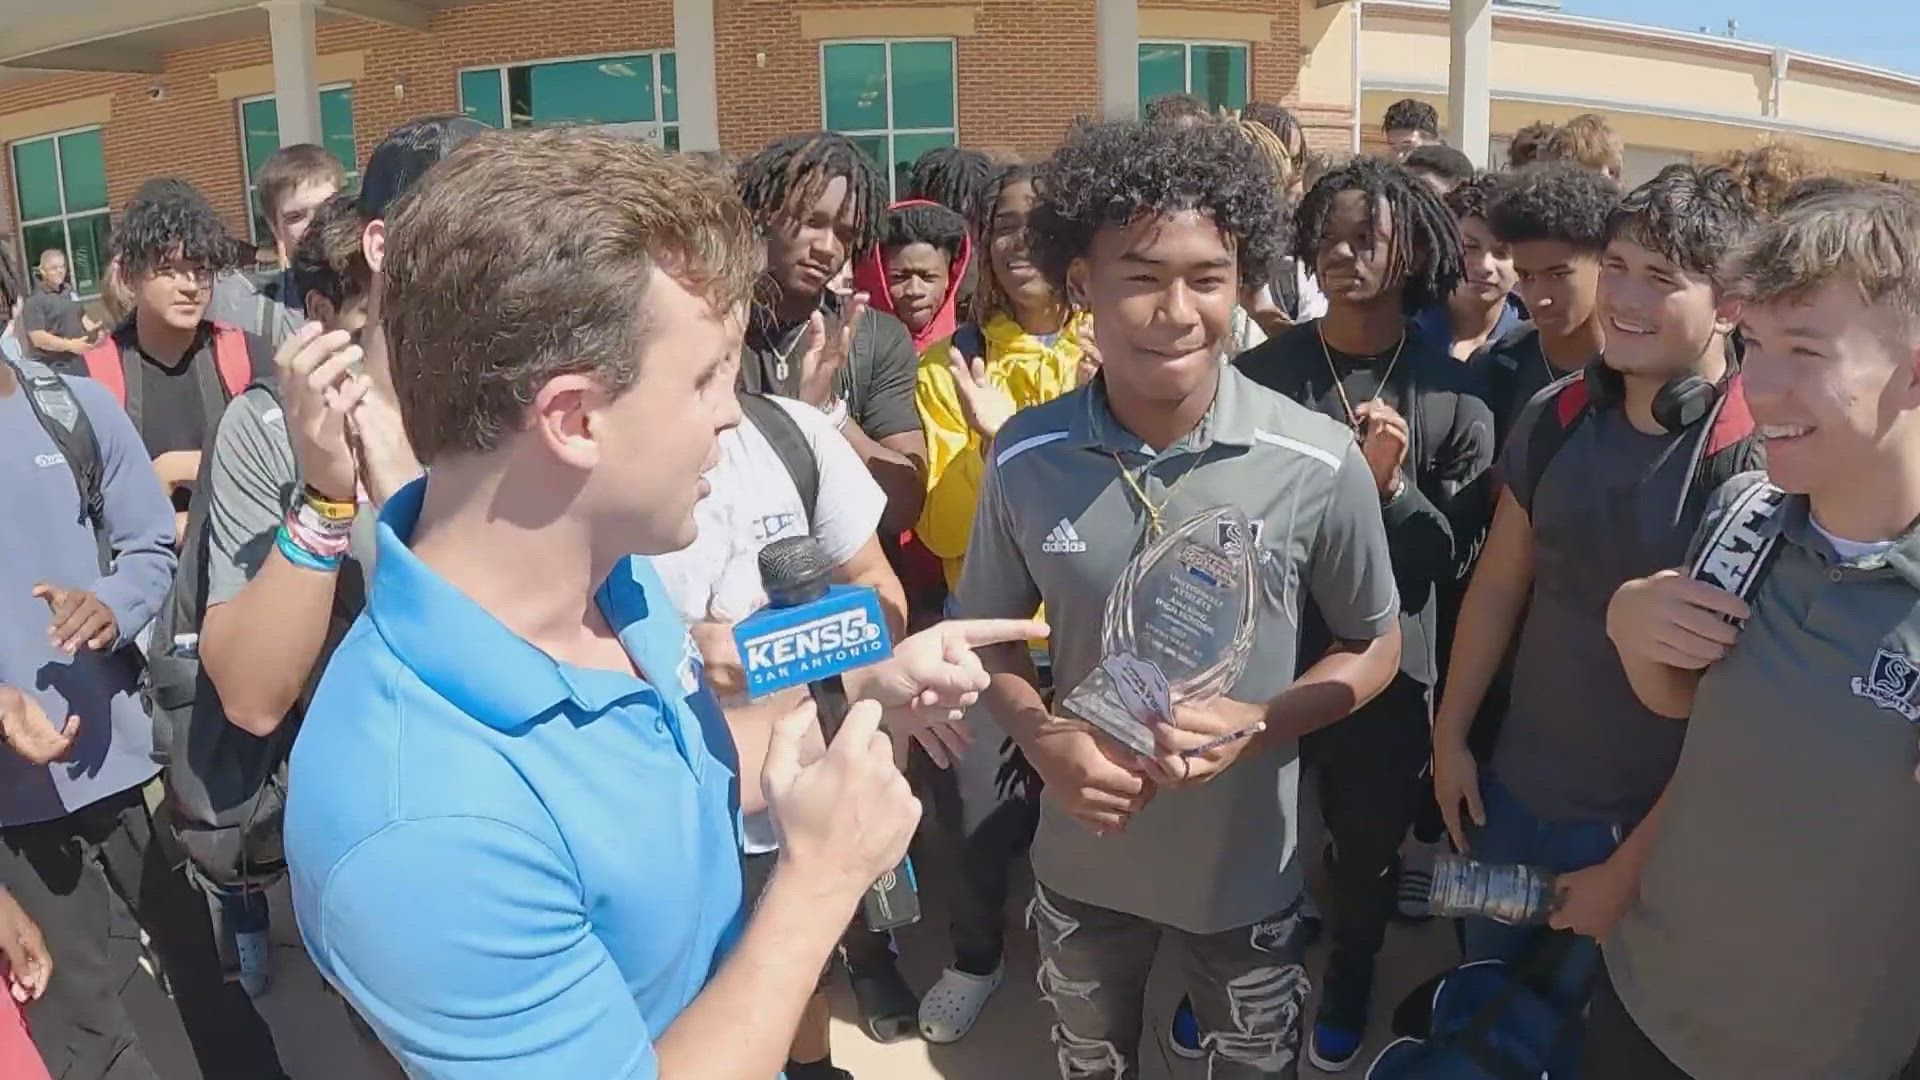 Grant won the weekly KENS 5 honor with an epic touchdown reception.